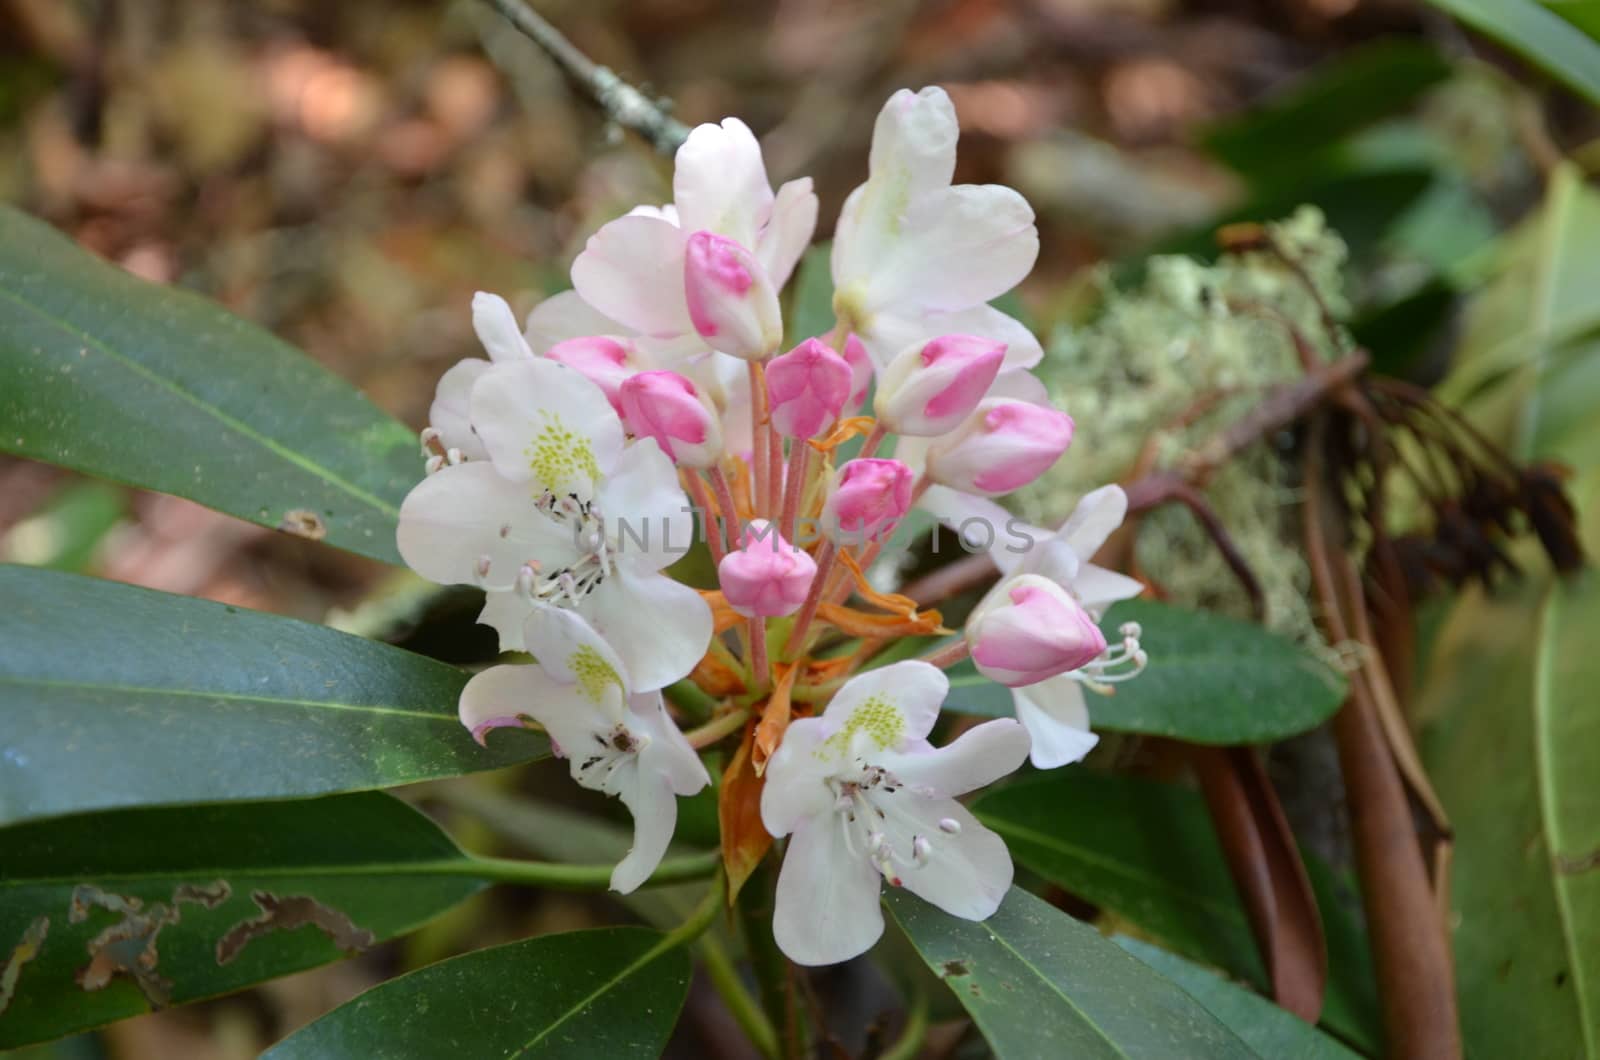 rhododendron found in the mountains of North Carolina. Shown up close.